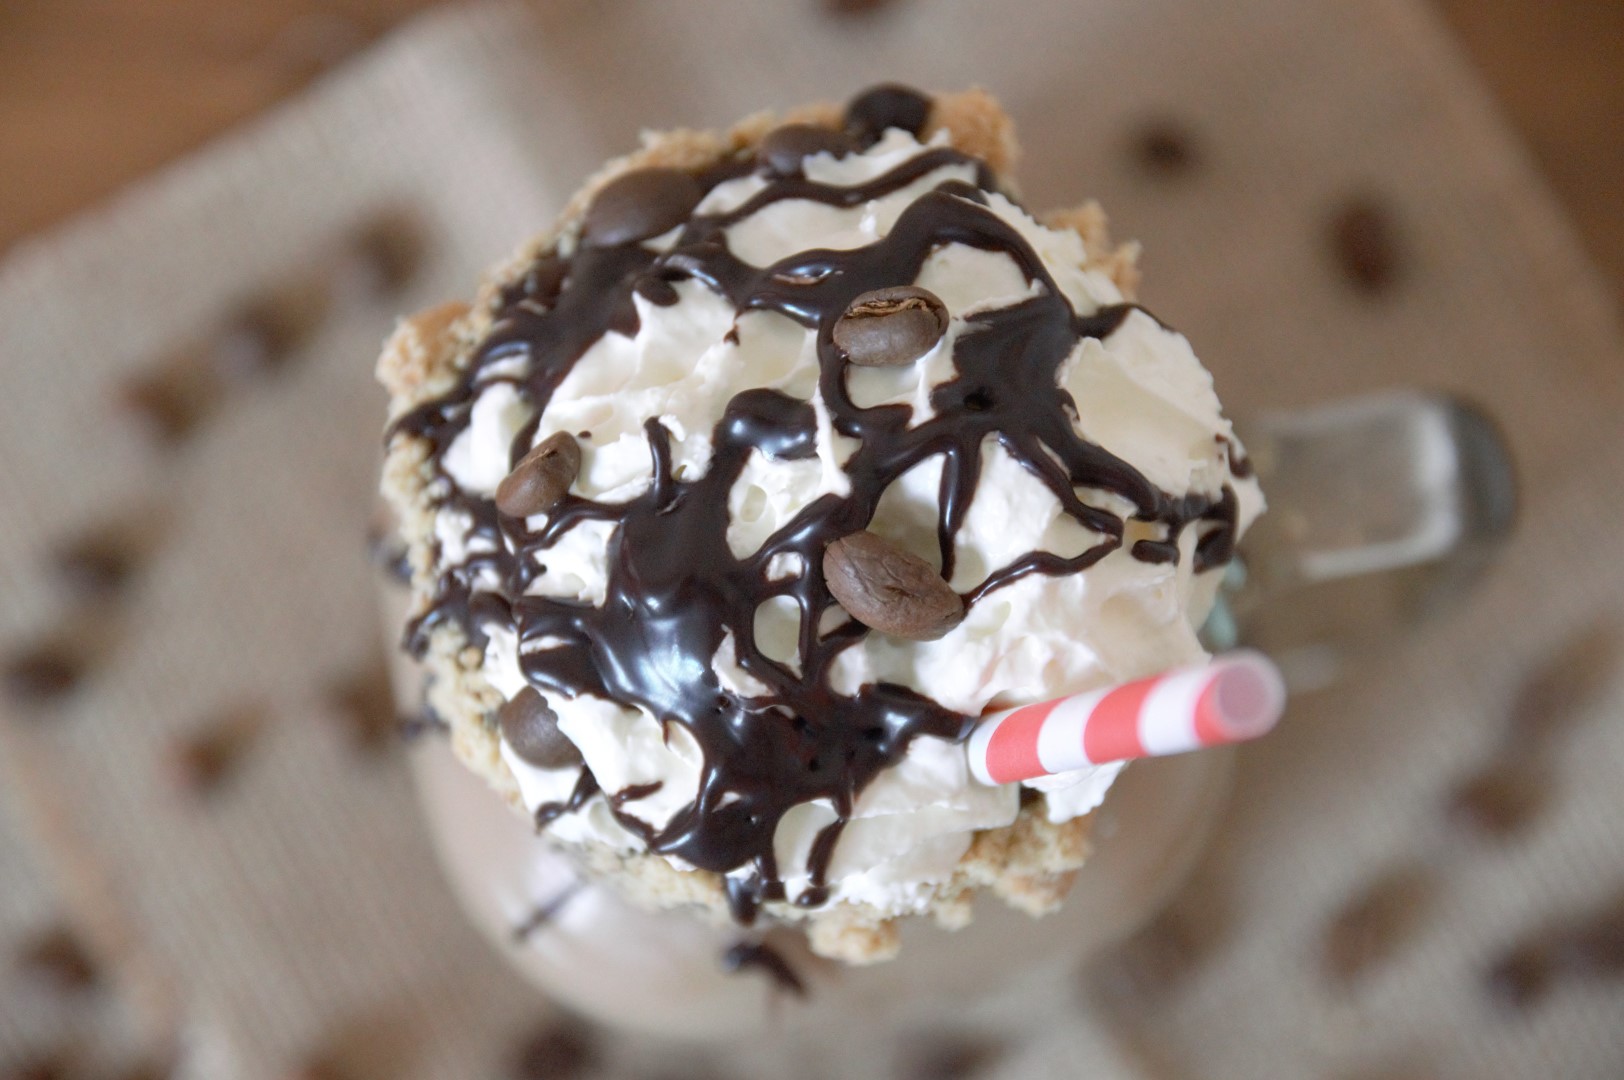 Mocha Freakshake - the perfect grown up milkshake! With a hit of delicious Perkulatte coffee, smoothness from the chocolate and topped with cream, sprinkled with marshmallows and a drizzle of chocolate sauce! The perfect indulgent drink! www.intolerantgourmand.com